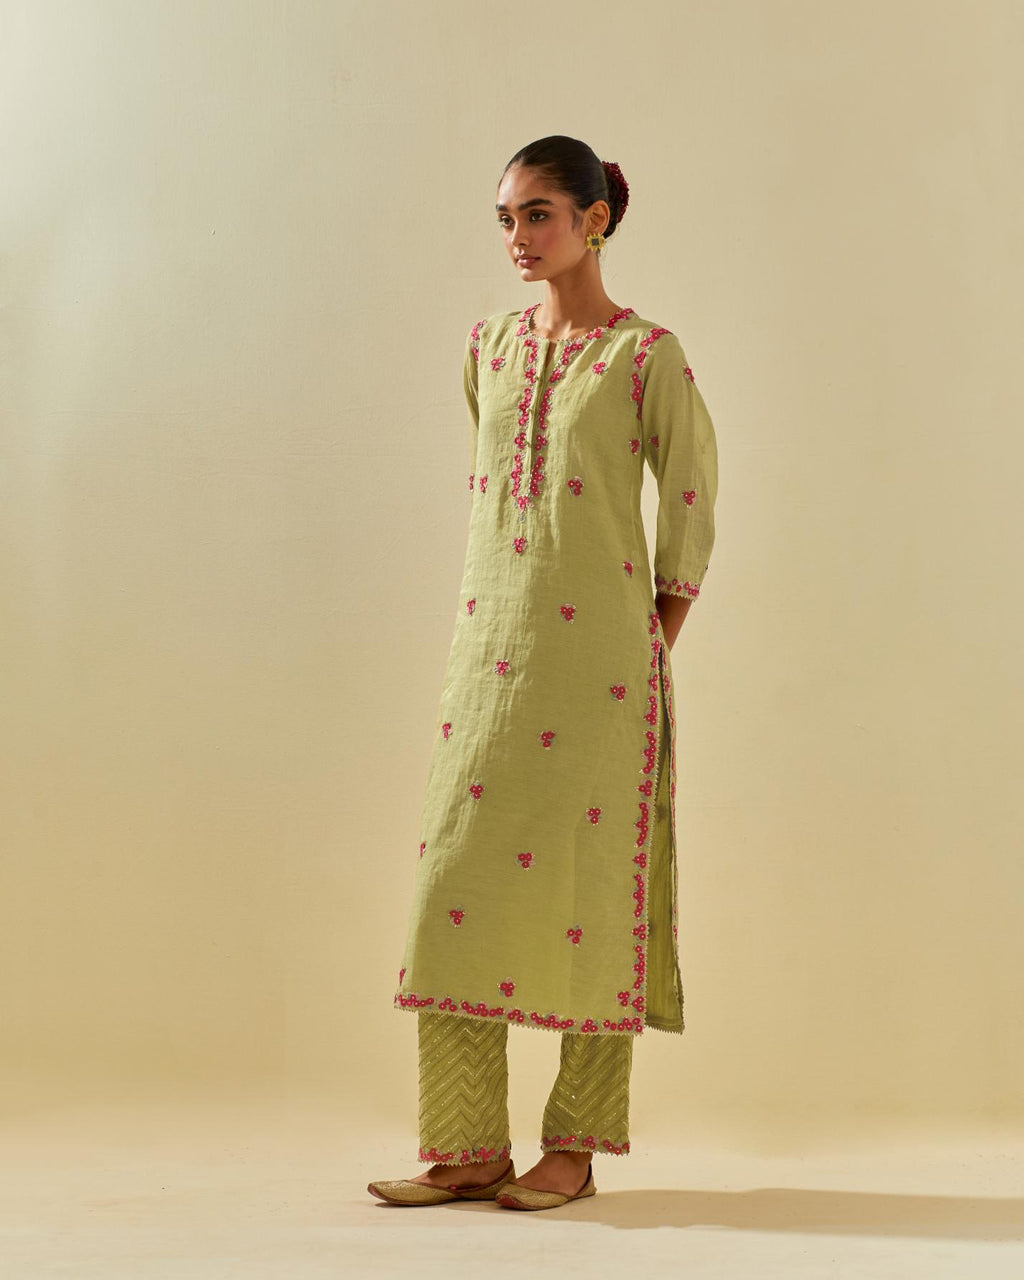 Green tissue chanderi straight kurta set, with contrast silk hand cut flowers embroidery, highlighted with gold sequins.